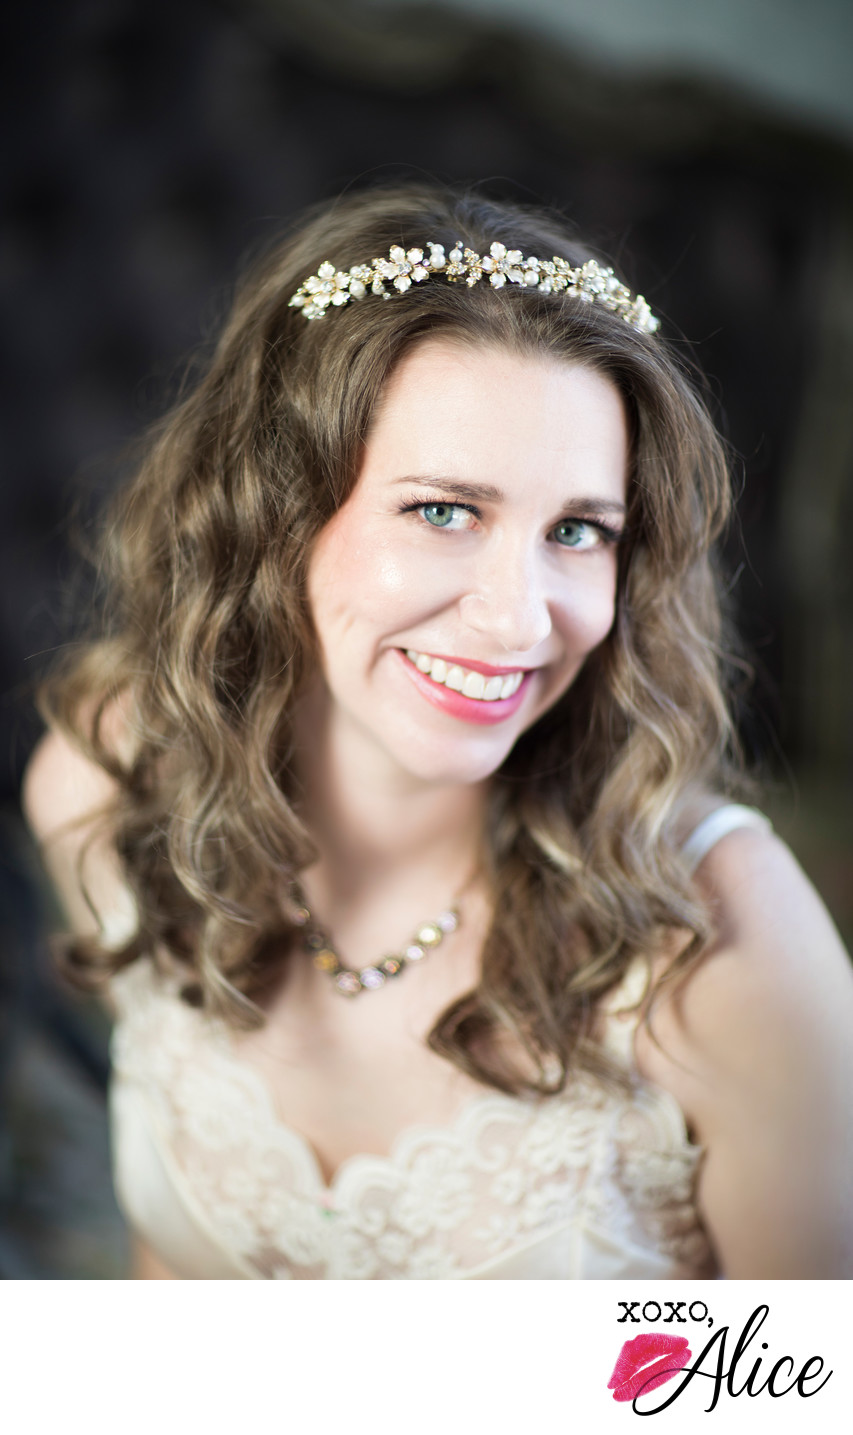 Wear Your Bridal Jewelry in Your Boudoir Session